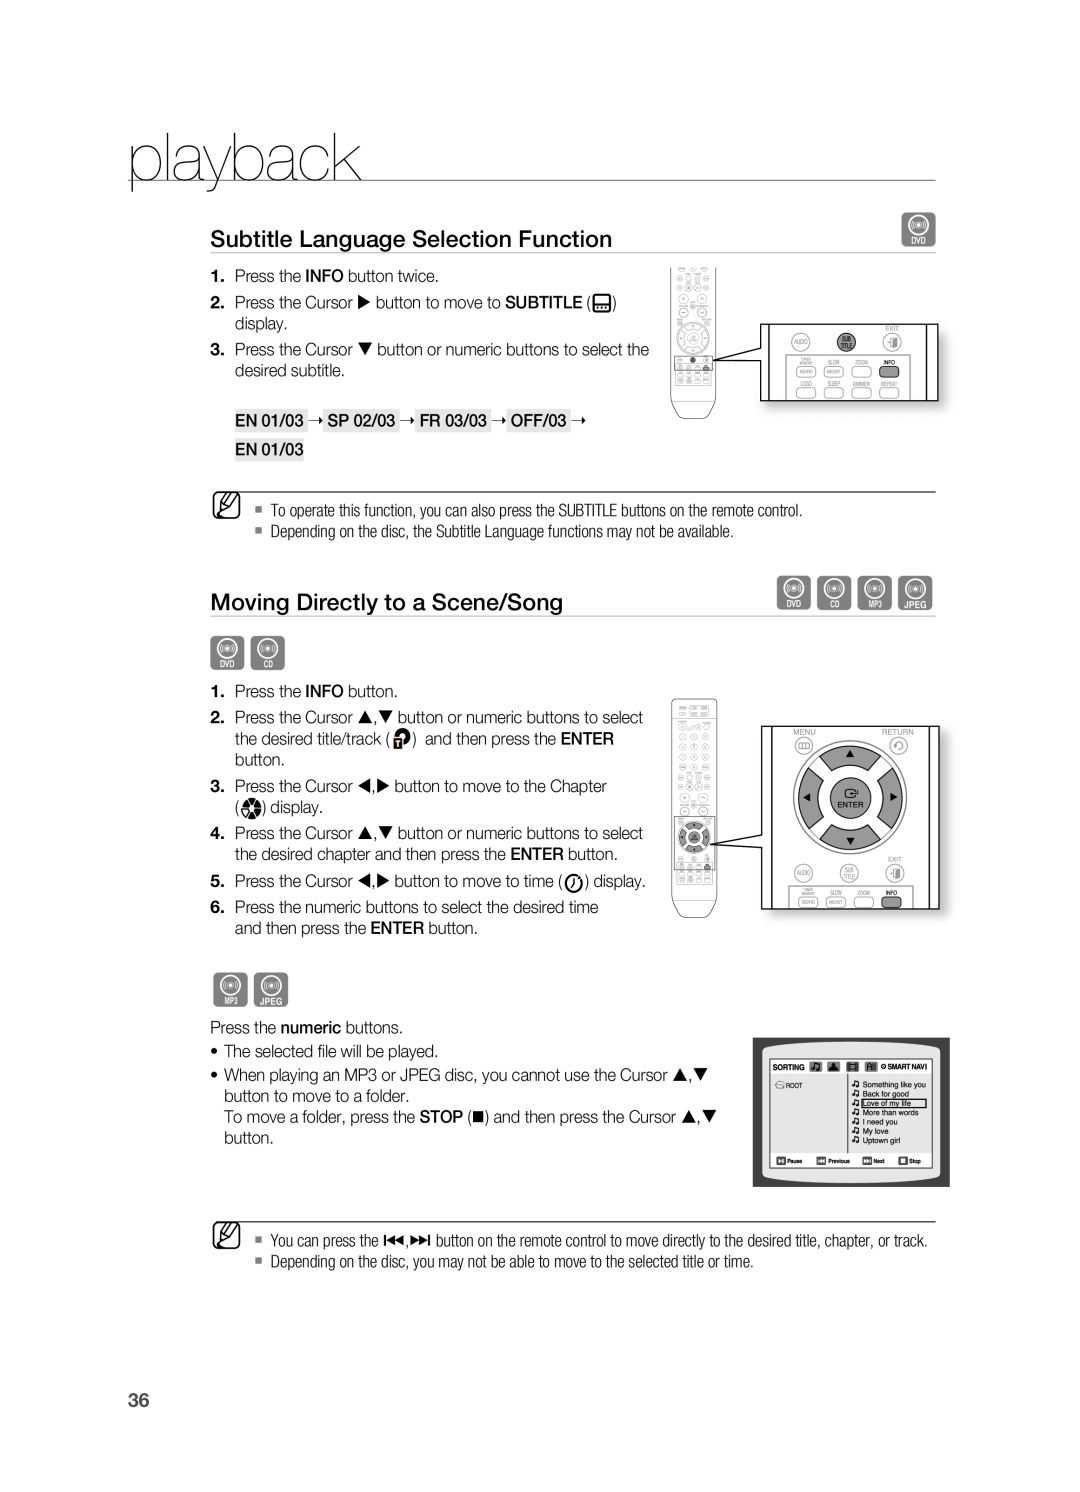 Samsung HT-X710 user manual Subtitle language Selection Function, Moving Directly to a Scene/Song, playback 